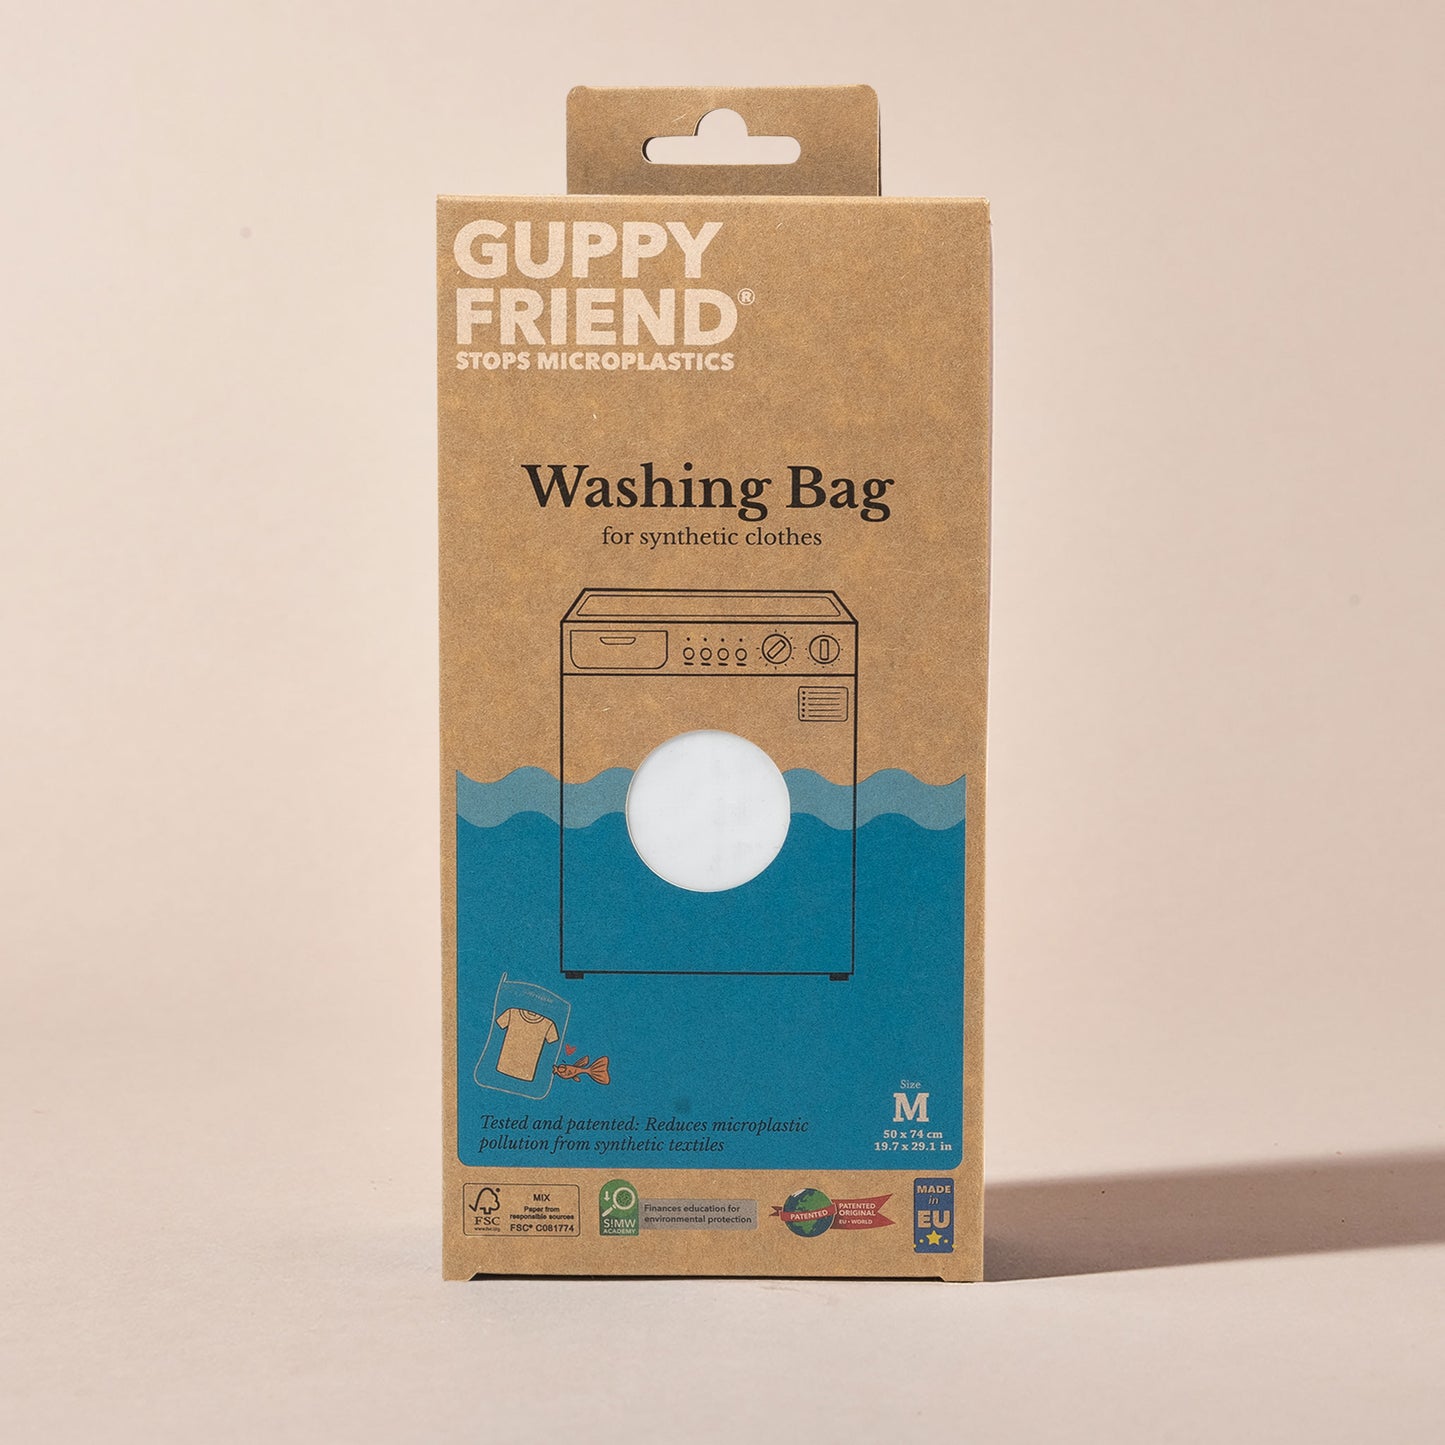 The front of Guppyfriend microfiber wash bag packaging—the design incorporates a washing machine and the sea